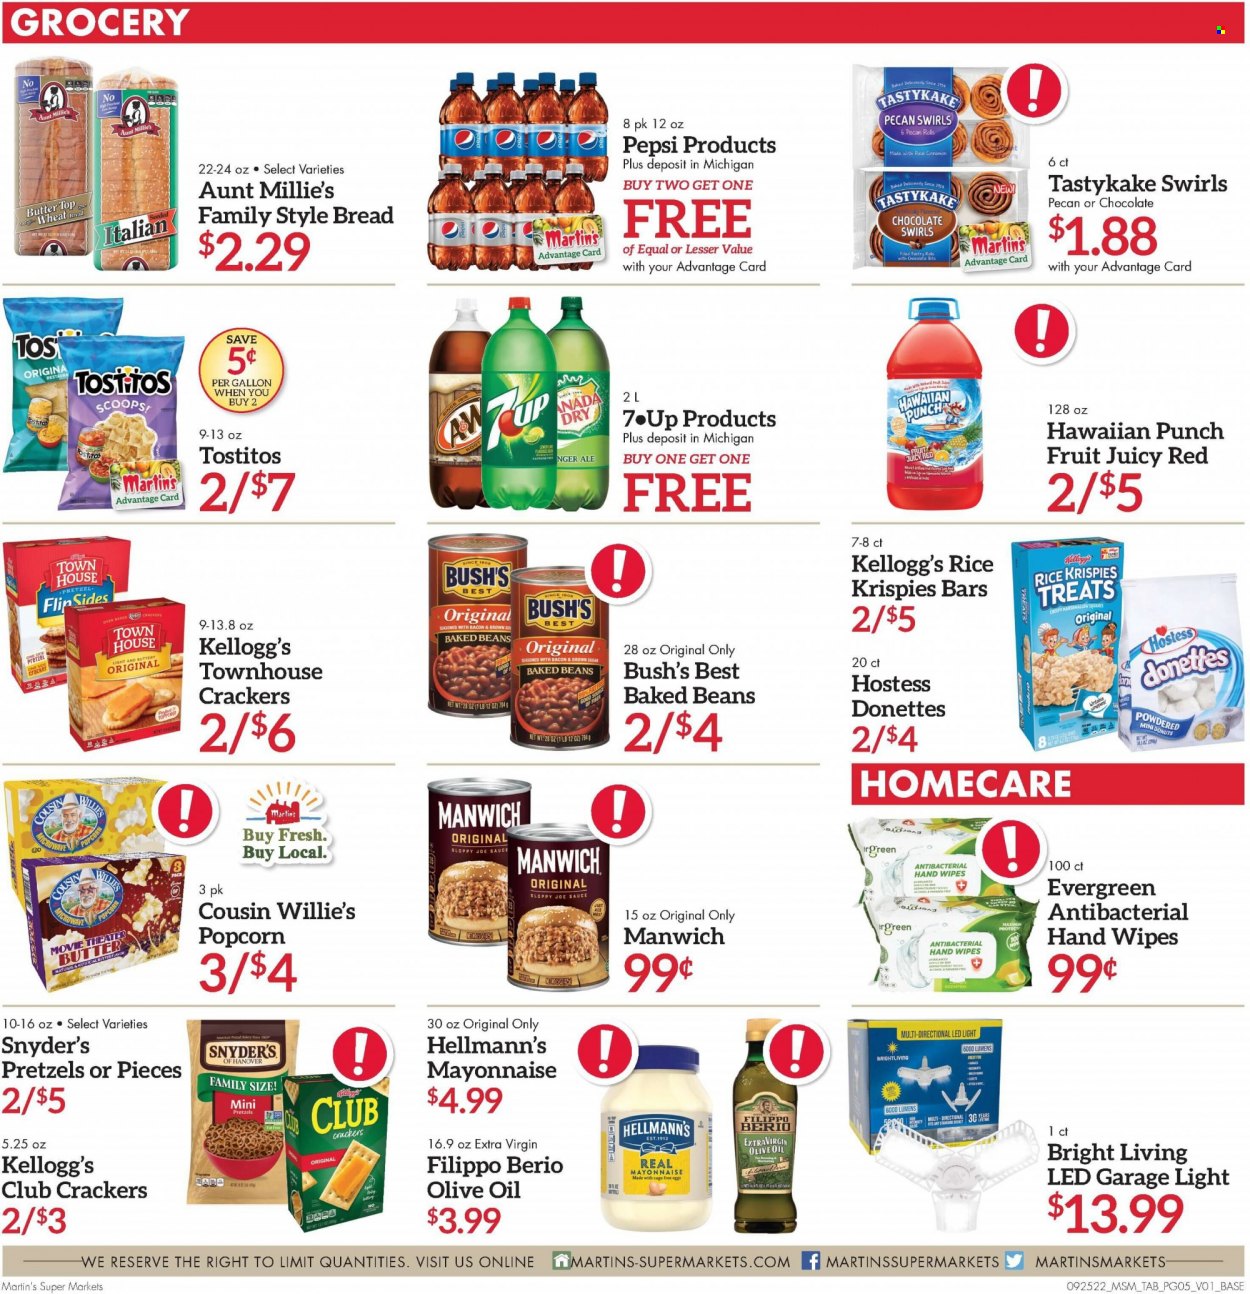 thumbnail - Martin’s Flyer - 09/25/2022 - 10/01/2022 - Sales products - bread, pretzels, donut, beans, sauce, eggs, cage free eggs, butter, mayonnaise, Hellmann’s, chocolate, crackers, Kellogg's, popcorn, Tostitos, baked beans, Manwich, Rice Krispies, cinnamon, extra virgin olive oil, olive oil, oil, Pepsi, wipes, LED light. Page 5.